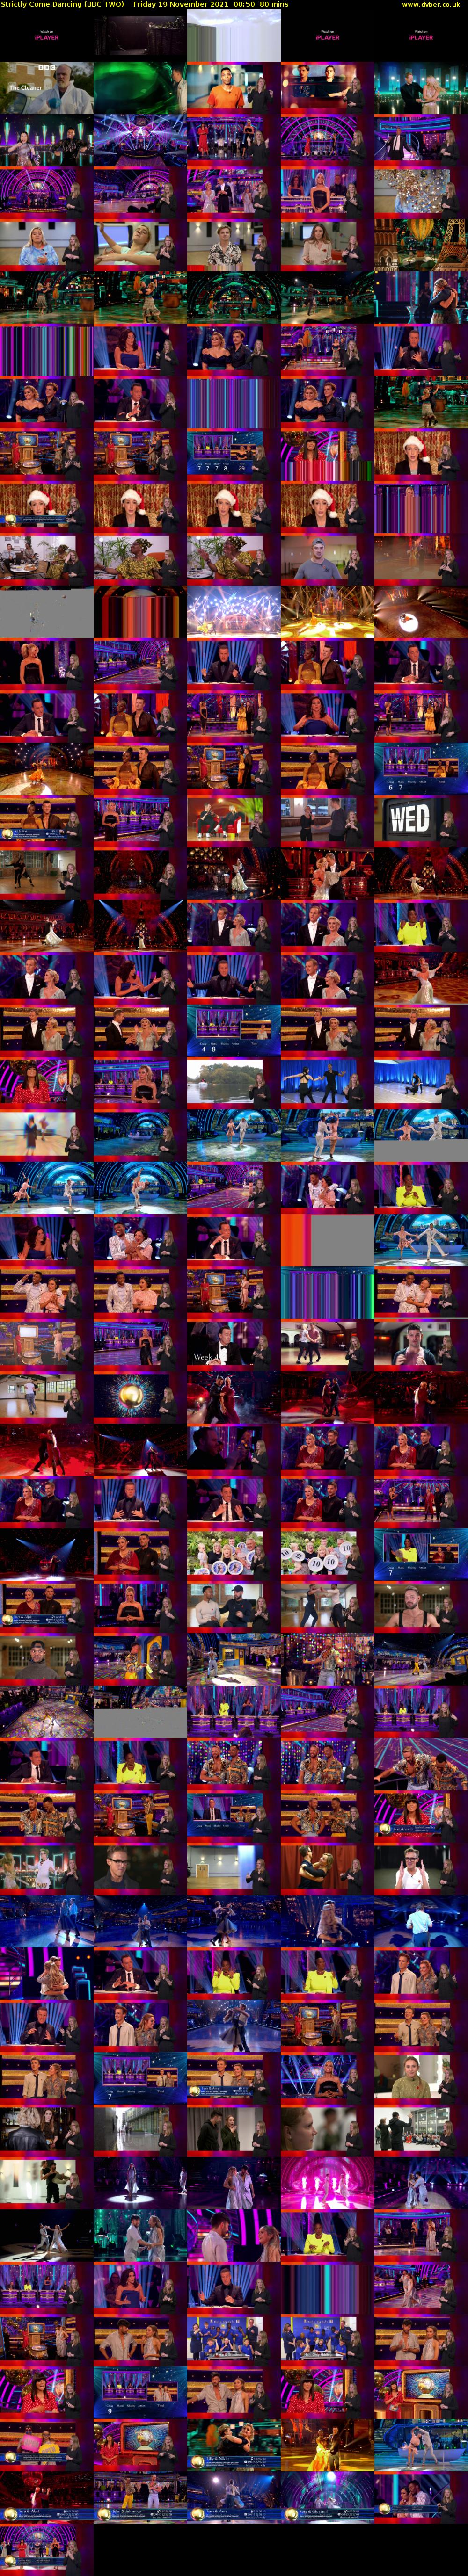 Strictly Come Dancing (BBC TWO) Friday 19 November 2021 00:50 - 02:10